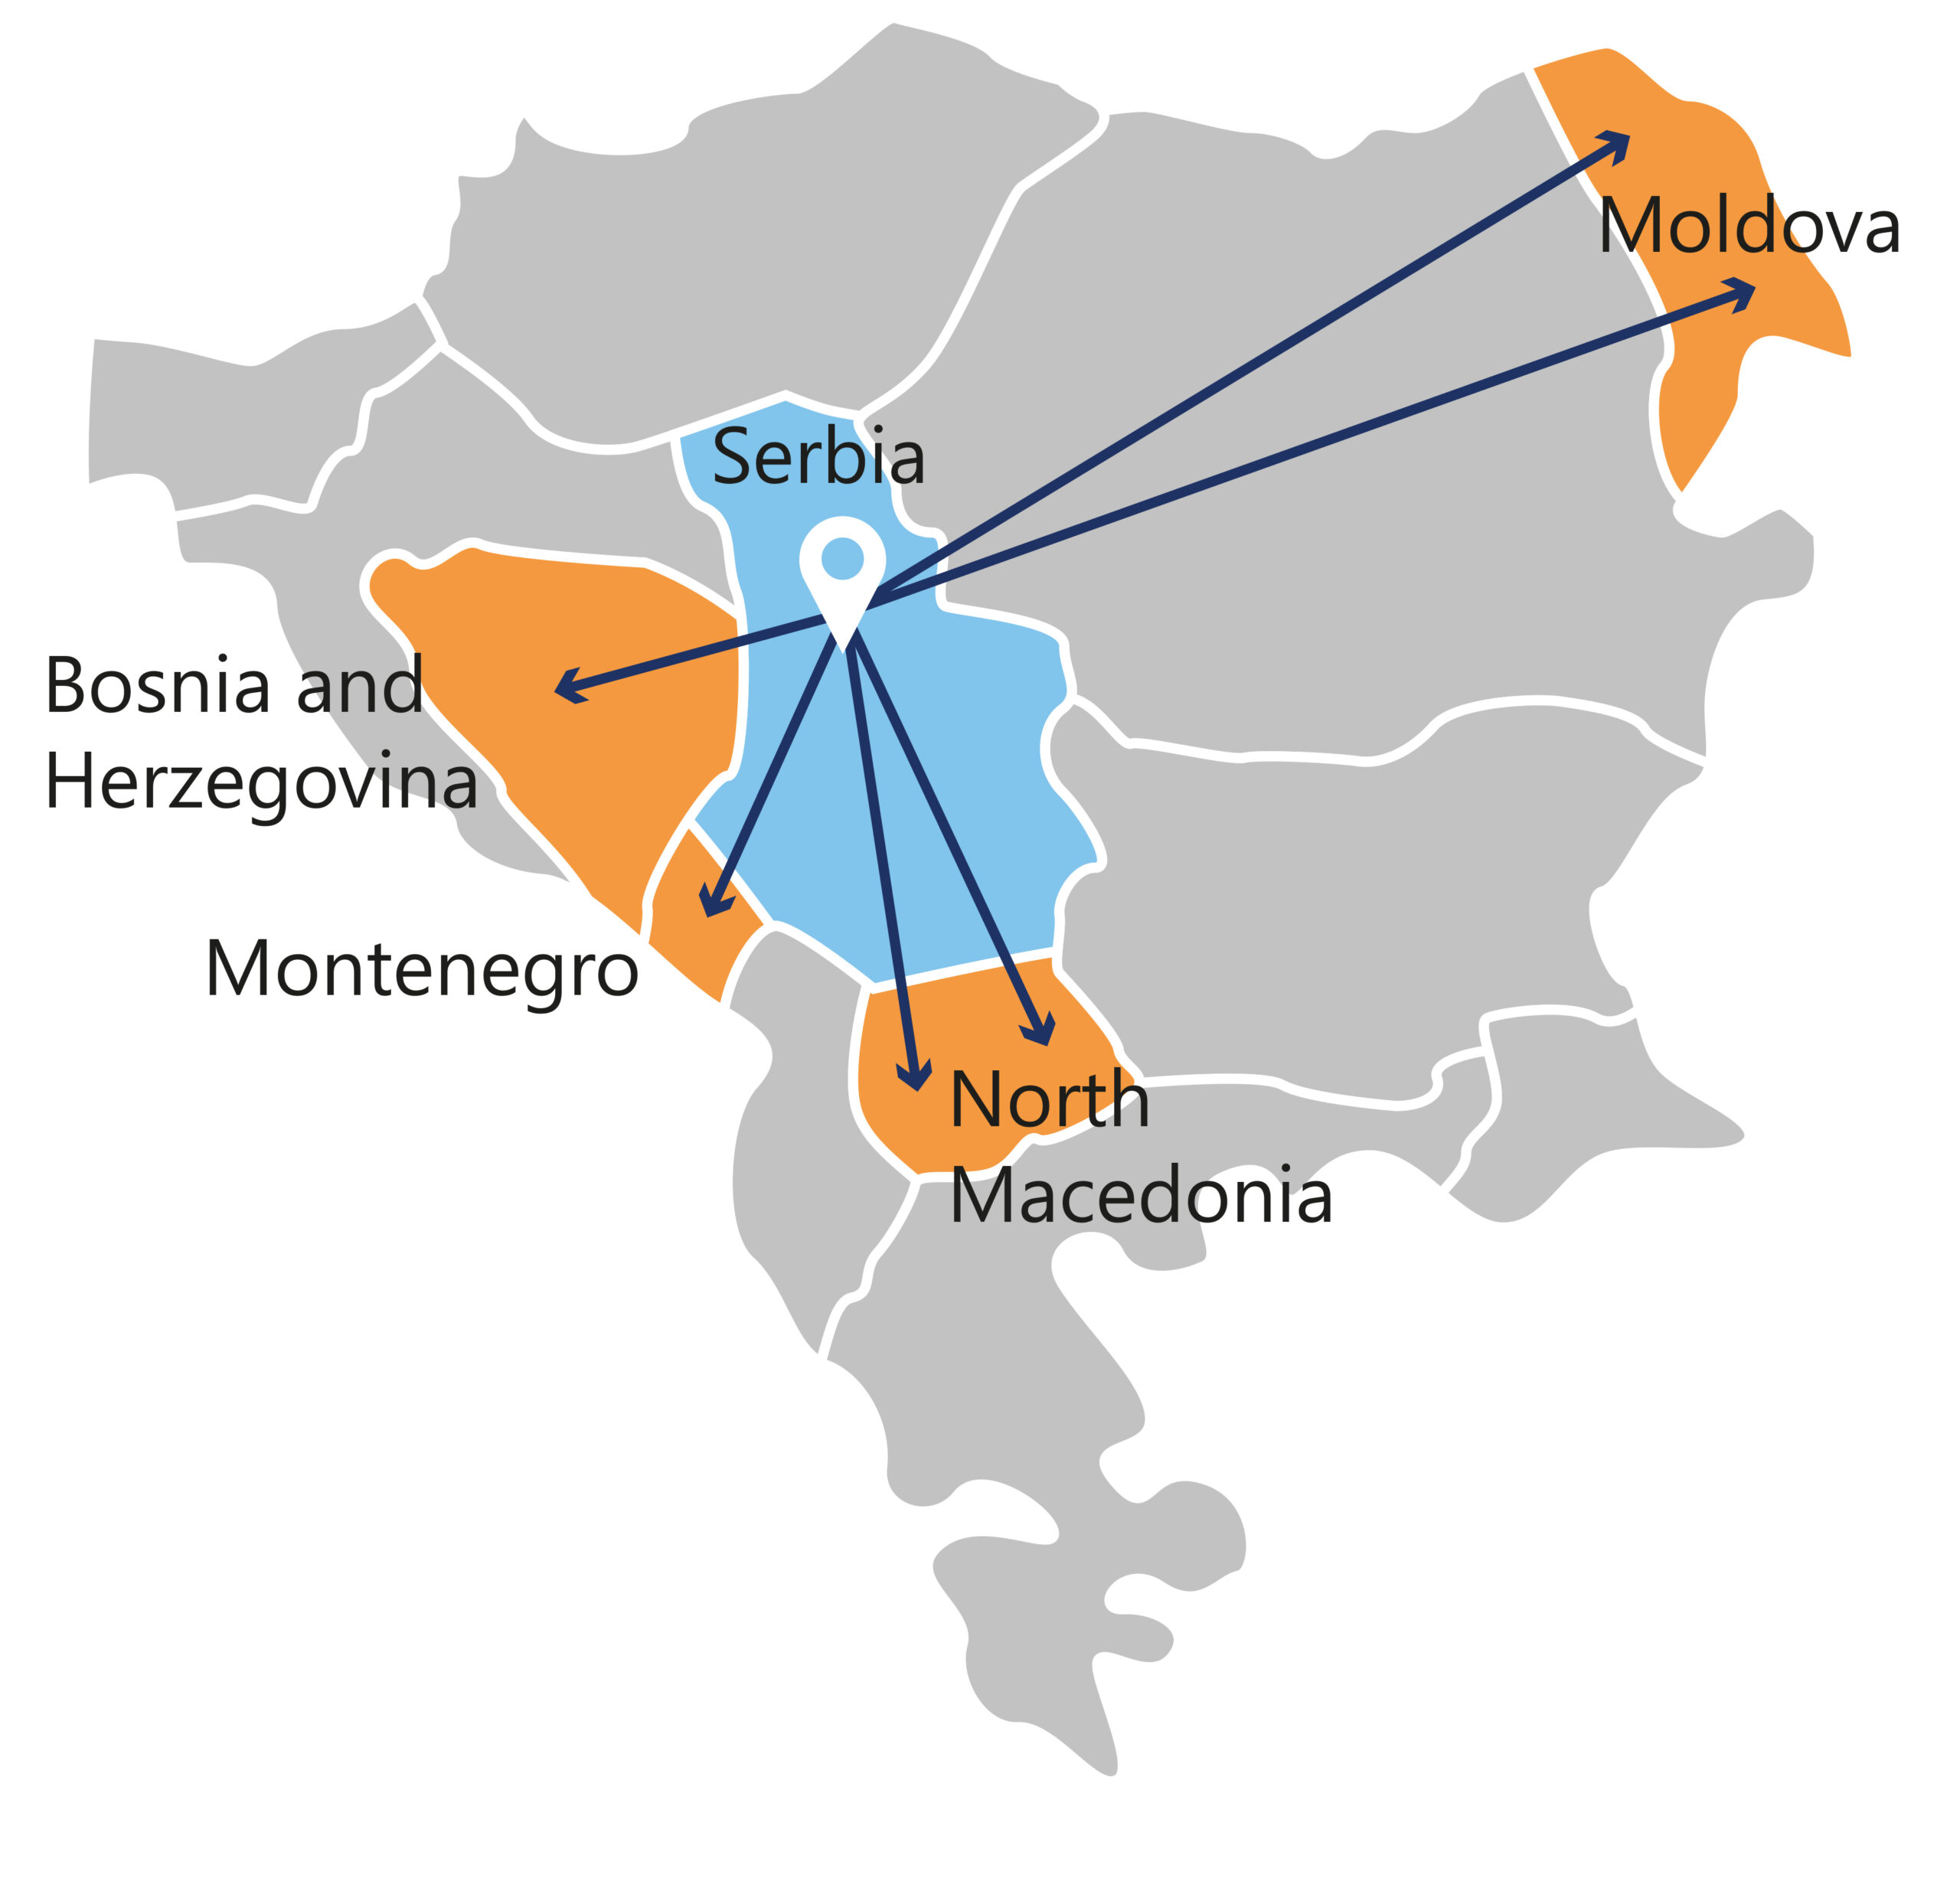 Bonded depot, clinical trials in Serbia